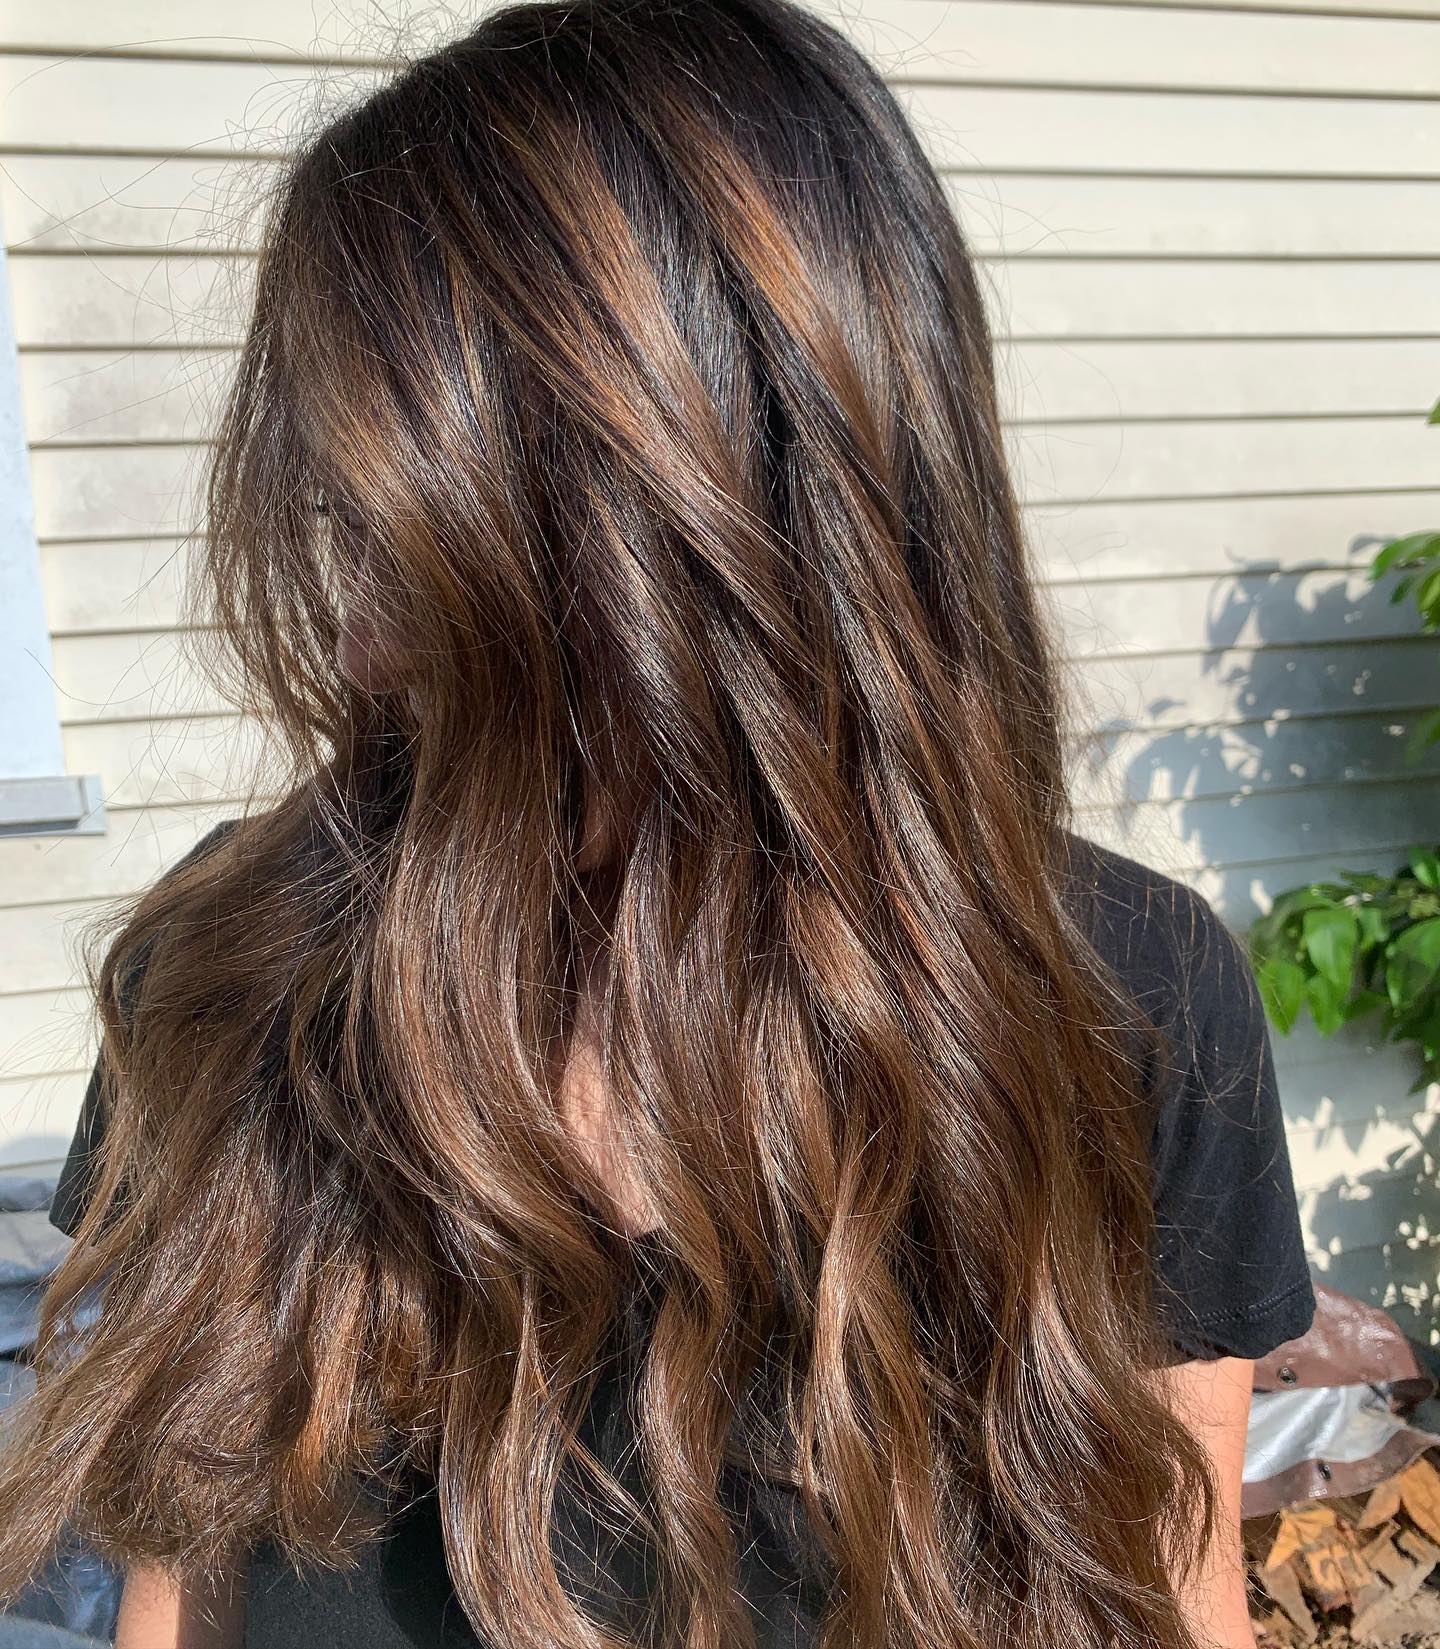 Cold Brew Hairstyle With Waves